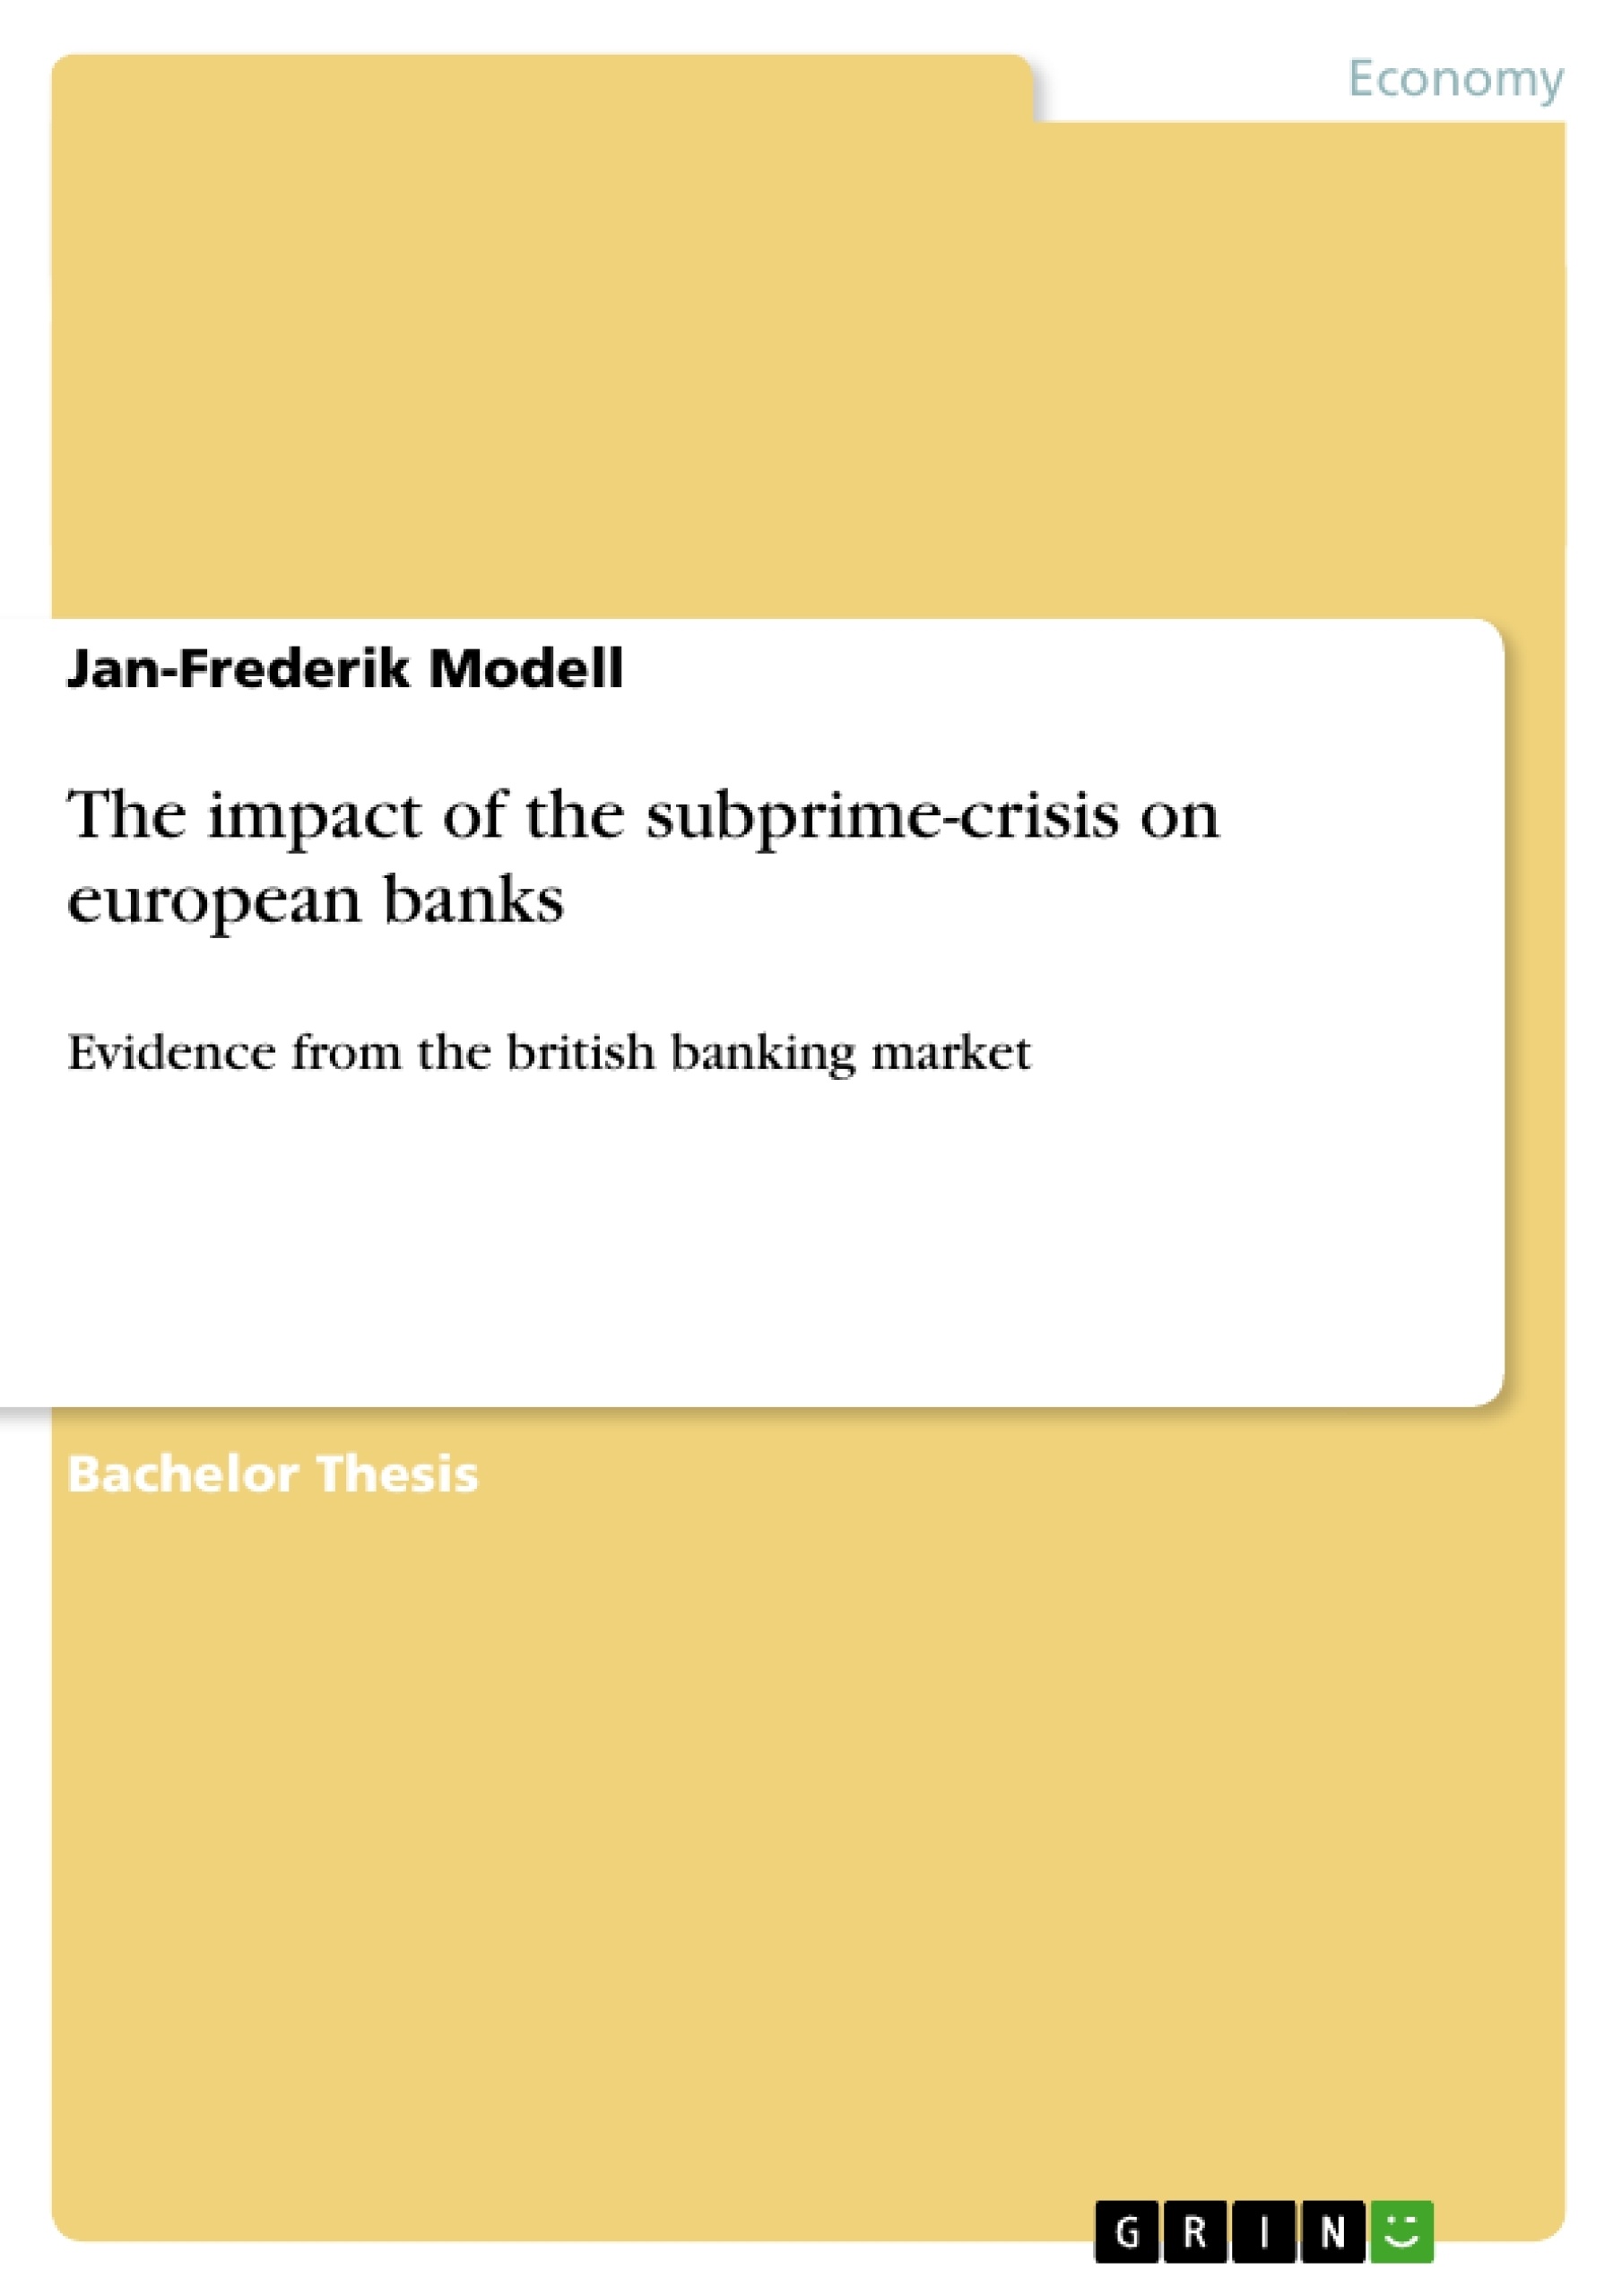 Title: The impact of the subprime-crisis on european banks